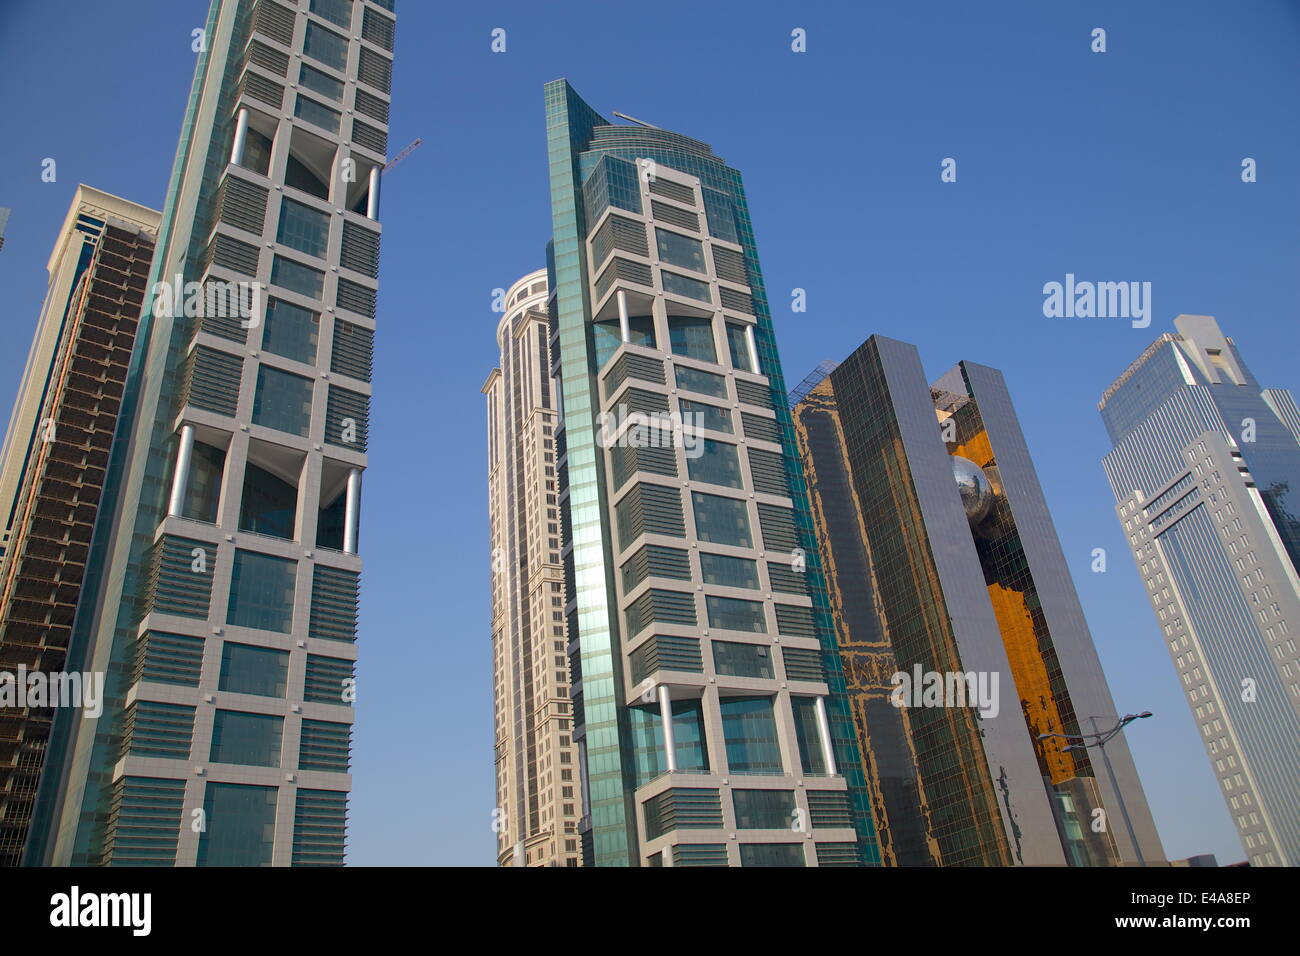 Contemporary architecture in City Centre, Doha, Qatar, Middle East Stock Photo